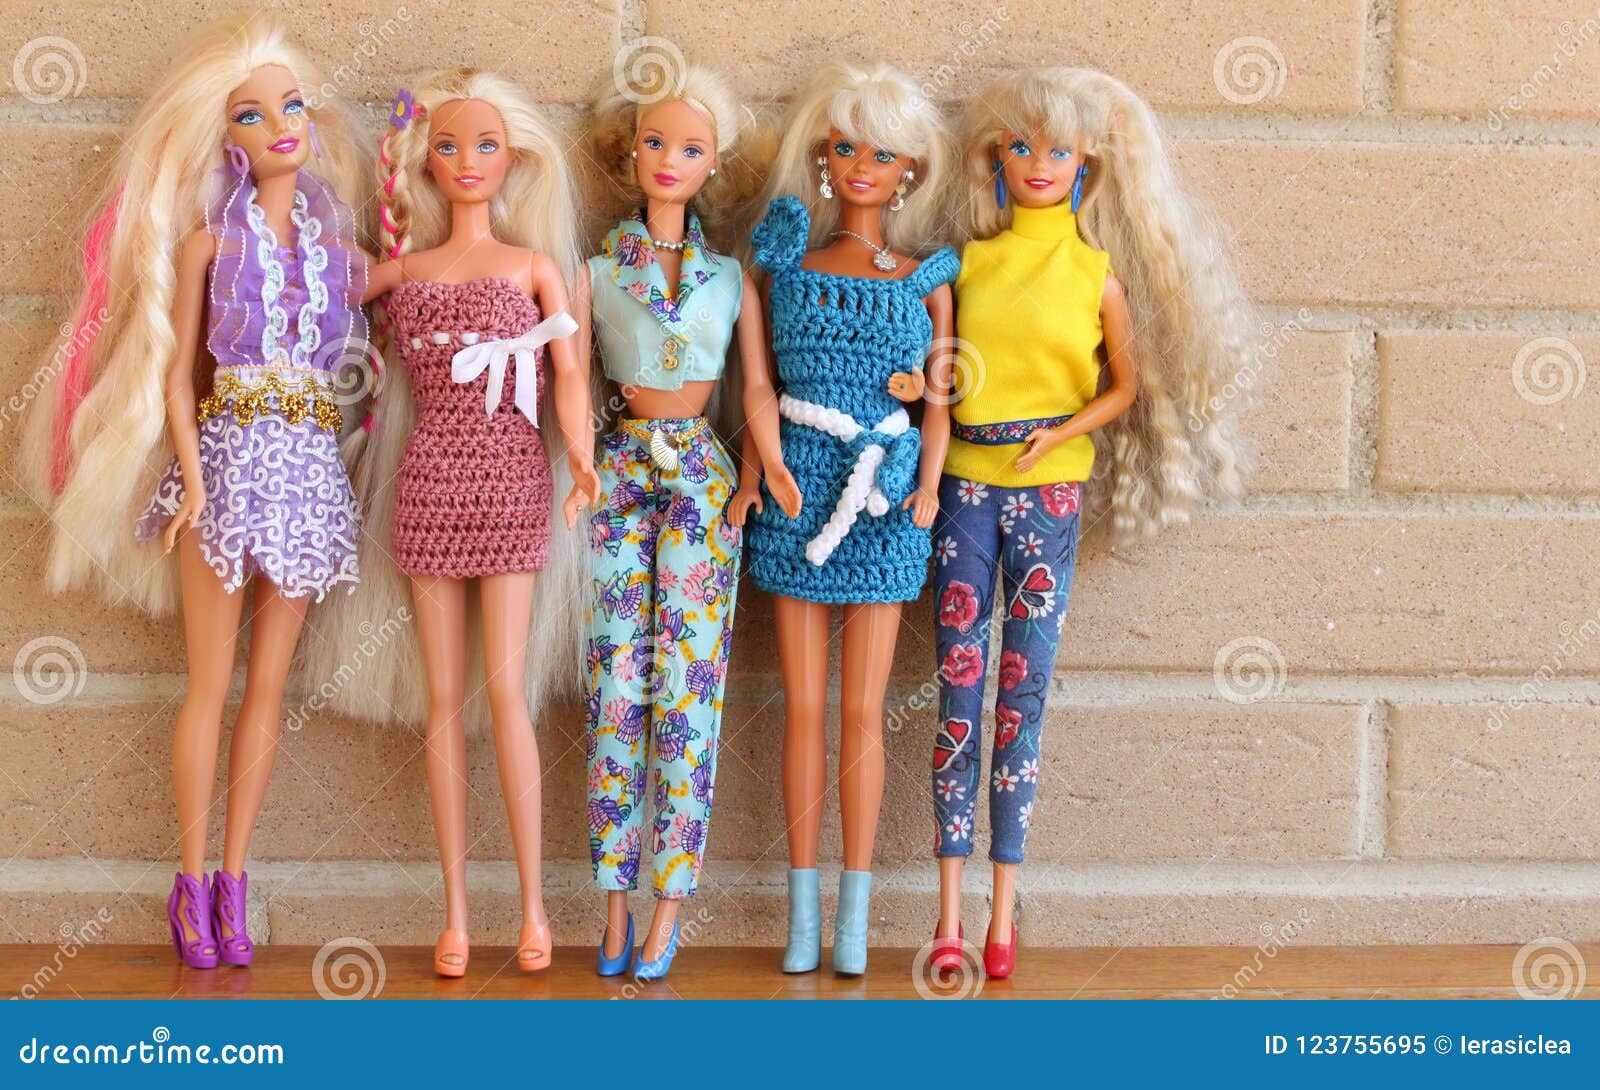 Barbie Dolls Whit 80s and 90s Outfits Editorial Image - Image of dolls,  icon: 123755695